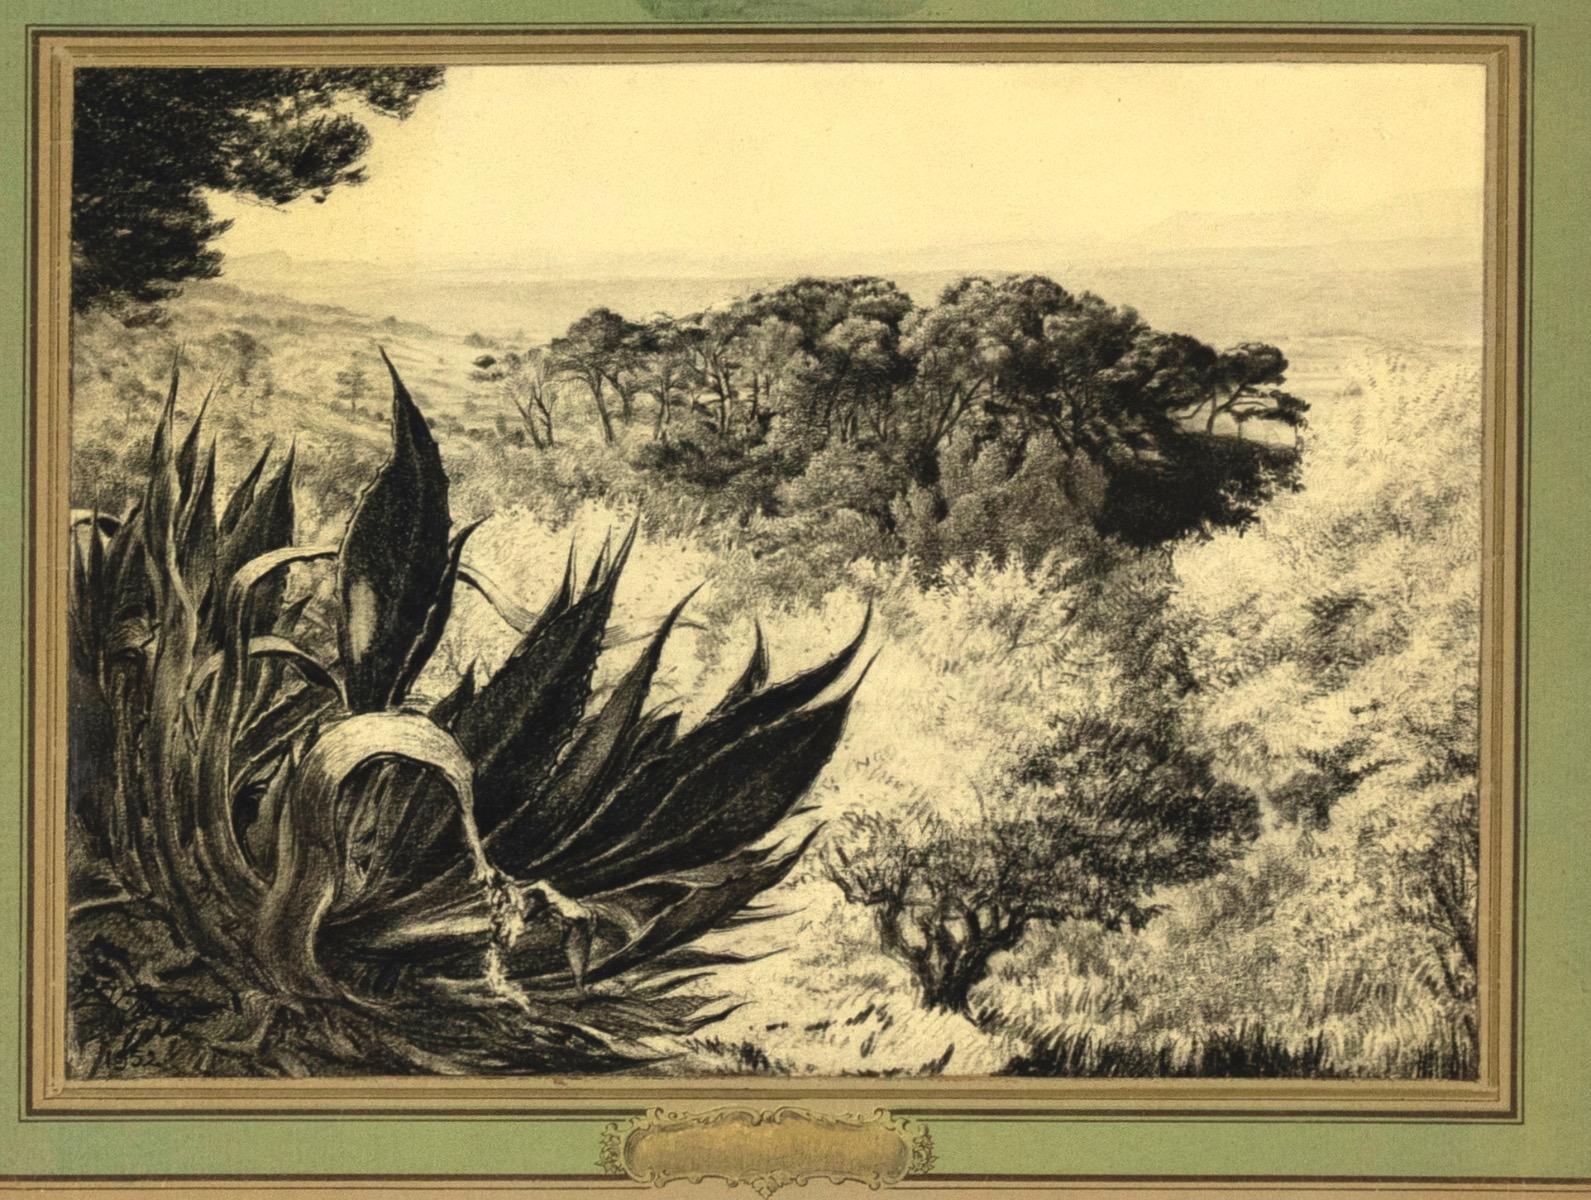 Landscape - Pencil and Charcoal Drawing - 1952 - Art by Unknown